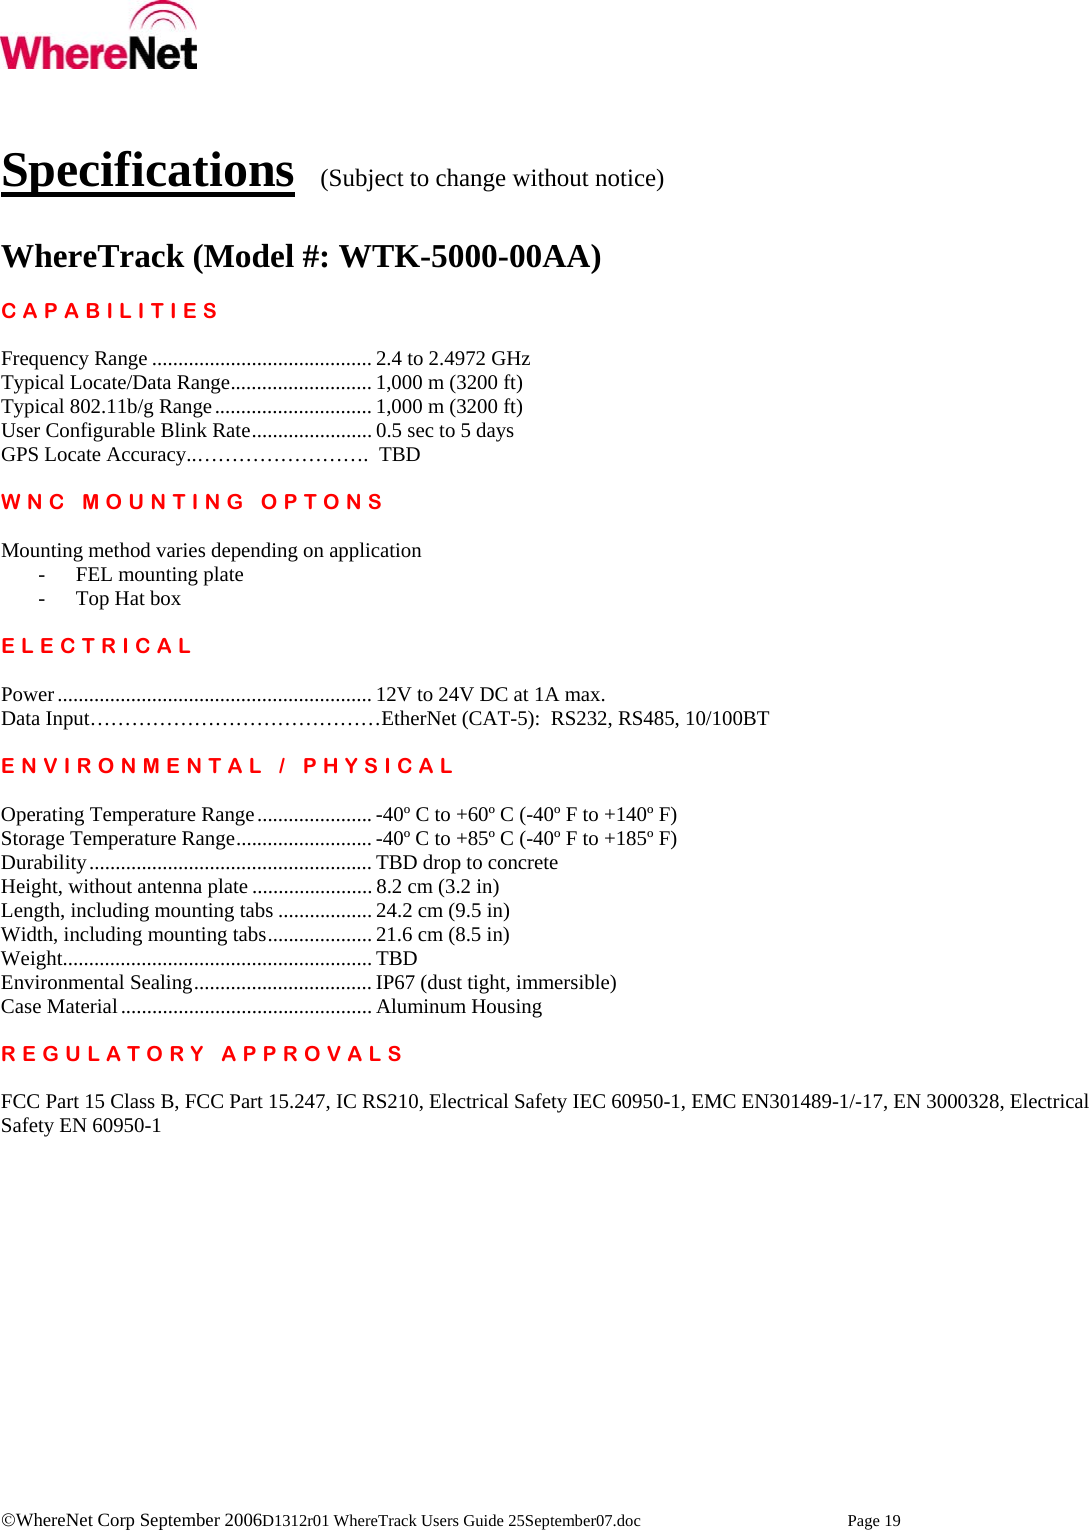    ©WhereNet Corp September 2006D1312r01 WhereTrack Users Guide 25September07.doc  Page 19   Specifications  (Subject to change without notice)  WhereTrack (Model #: WTK-5000-00AA)  CAPABILITIES  Frequency Range .......................................... 2.4 to 2.4972 GHz Typical Locate/Data Range........................... 1,000 m (3200 ft) Typical 802.11b/g Range.............................. 1,000 m (3200 ft) User Configurable Blink Rate....................... 0.5 sec to 5 days GPS Locate Accuracy..…………………….  TBD  WNC MOUNTING OPTONS  Mounting method varies depending on application - FEL mounting plate - Top Hat box  ELECTRICAL  Power............................................................ 12V to 24V DC at 1A max. Data Input……………………………………EtherNet (CAT-5):  RS232, RS485, 10/100BT  ENVIRONMENTAL / PHYSICAL  Operating Temperature Range...................... -40º C to +60º C (-40º F to +140º F) Storage Temperature Range.......................... -40º C to +85º C (-40º F to +185º F) Durability...................................................... TBD drop to concrete Height, without antenna plate ....................... 8.2 cm (3.2 in) Length, including mounting tabs .................. 24.2 cm (9.5 in) Width, including mounting tabs.................... 21.6 cm (8.5 in) Weight........................................................... TBD Environmental Sealing.................................. IP67 (dust tight, immersible) Case Material................................................ Aluminum Housing  REGULATORY APPROVALS  FCC Part 15 Class B, FCC Part 15.247, IC RS210, Electrical Safety IEC 60950-1, EMC EN301489-1/-17, EN 3000328, Electrical Safety EN 60950-1  